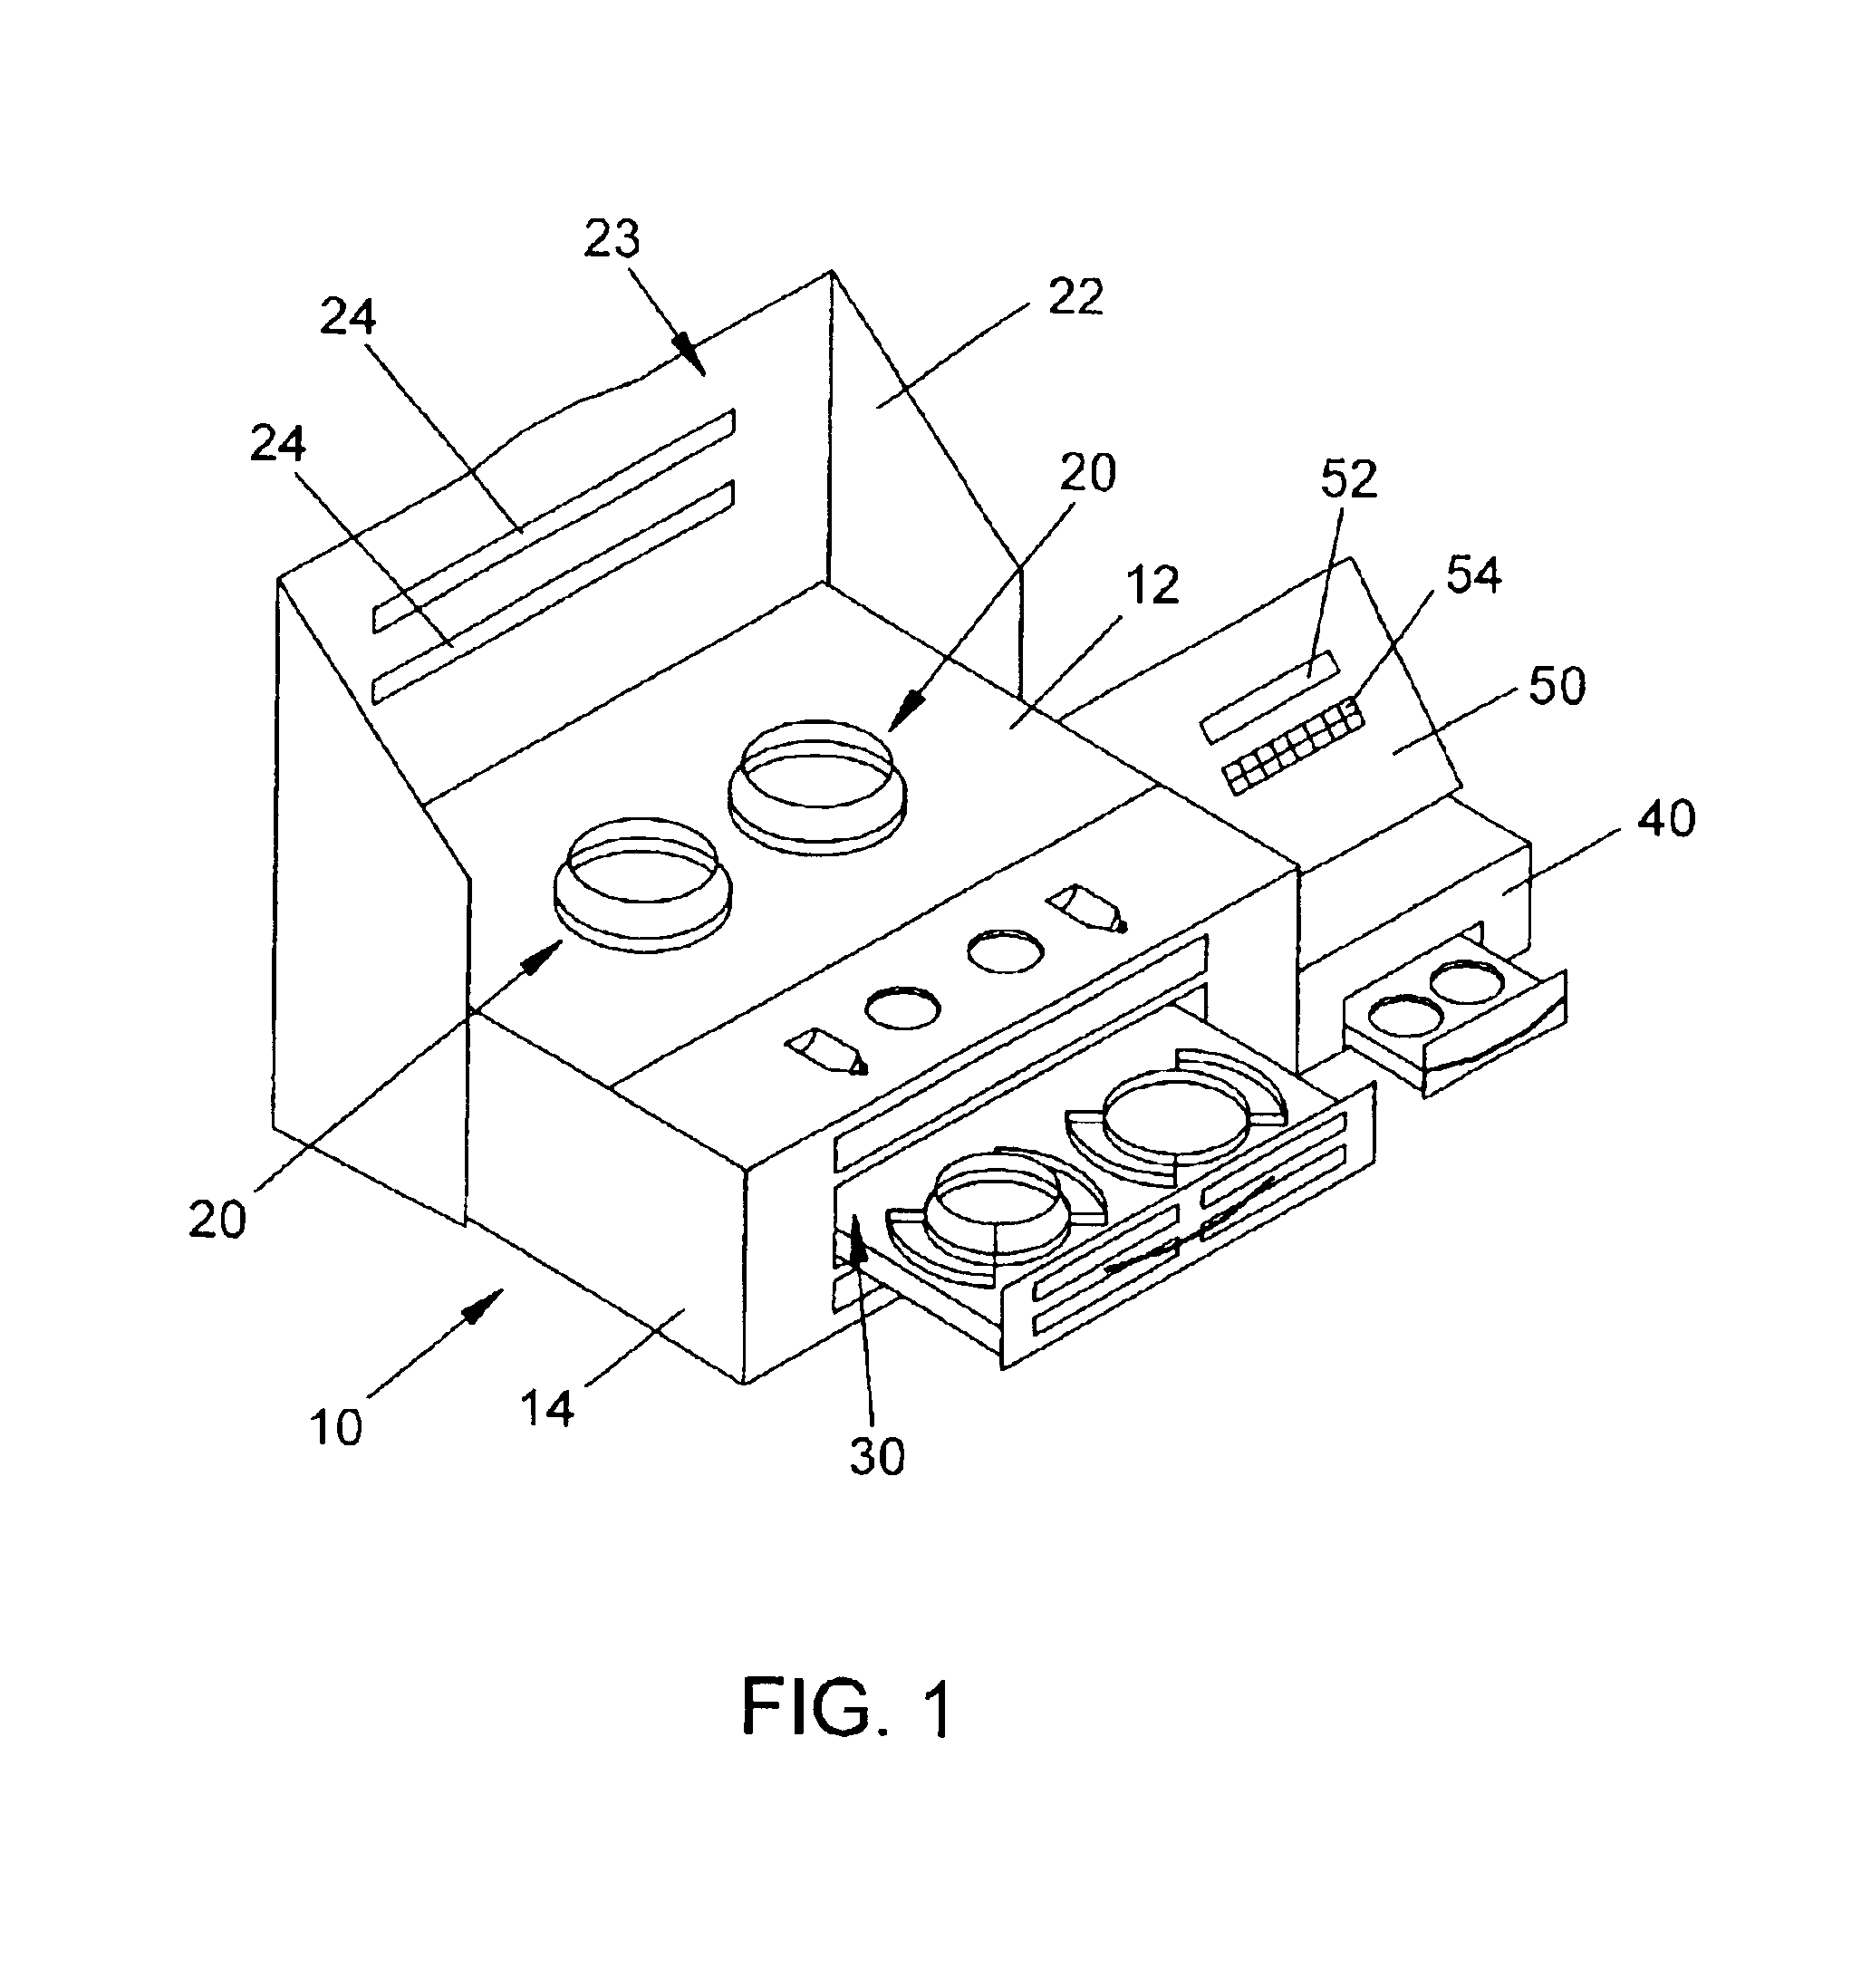 Plastic lens system, compositions, and methods